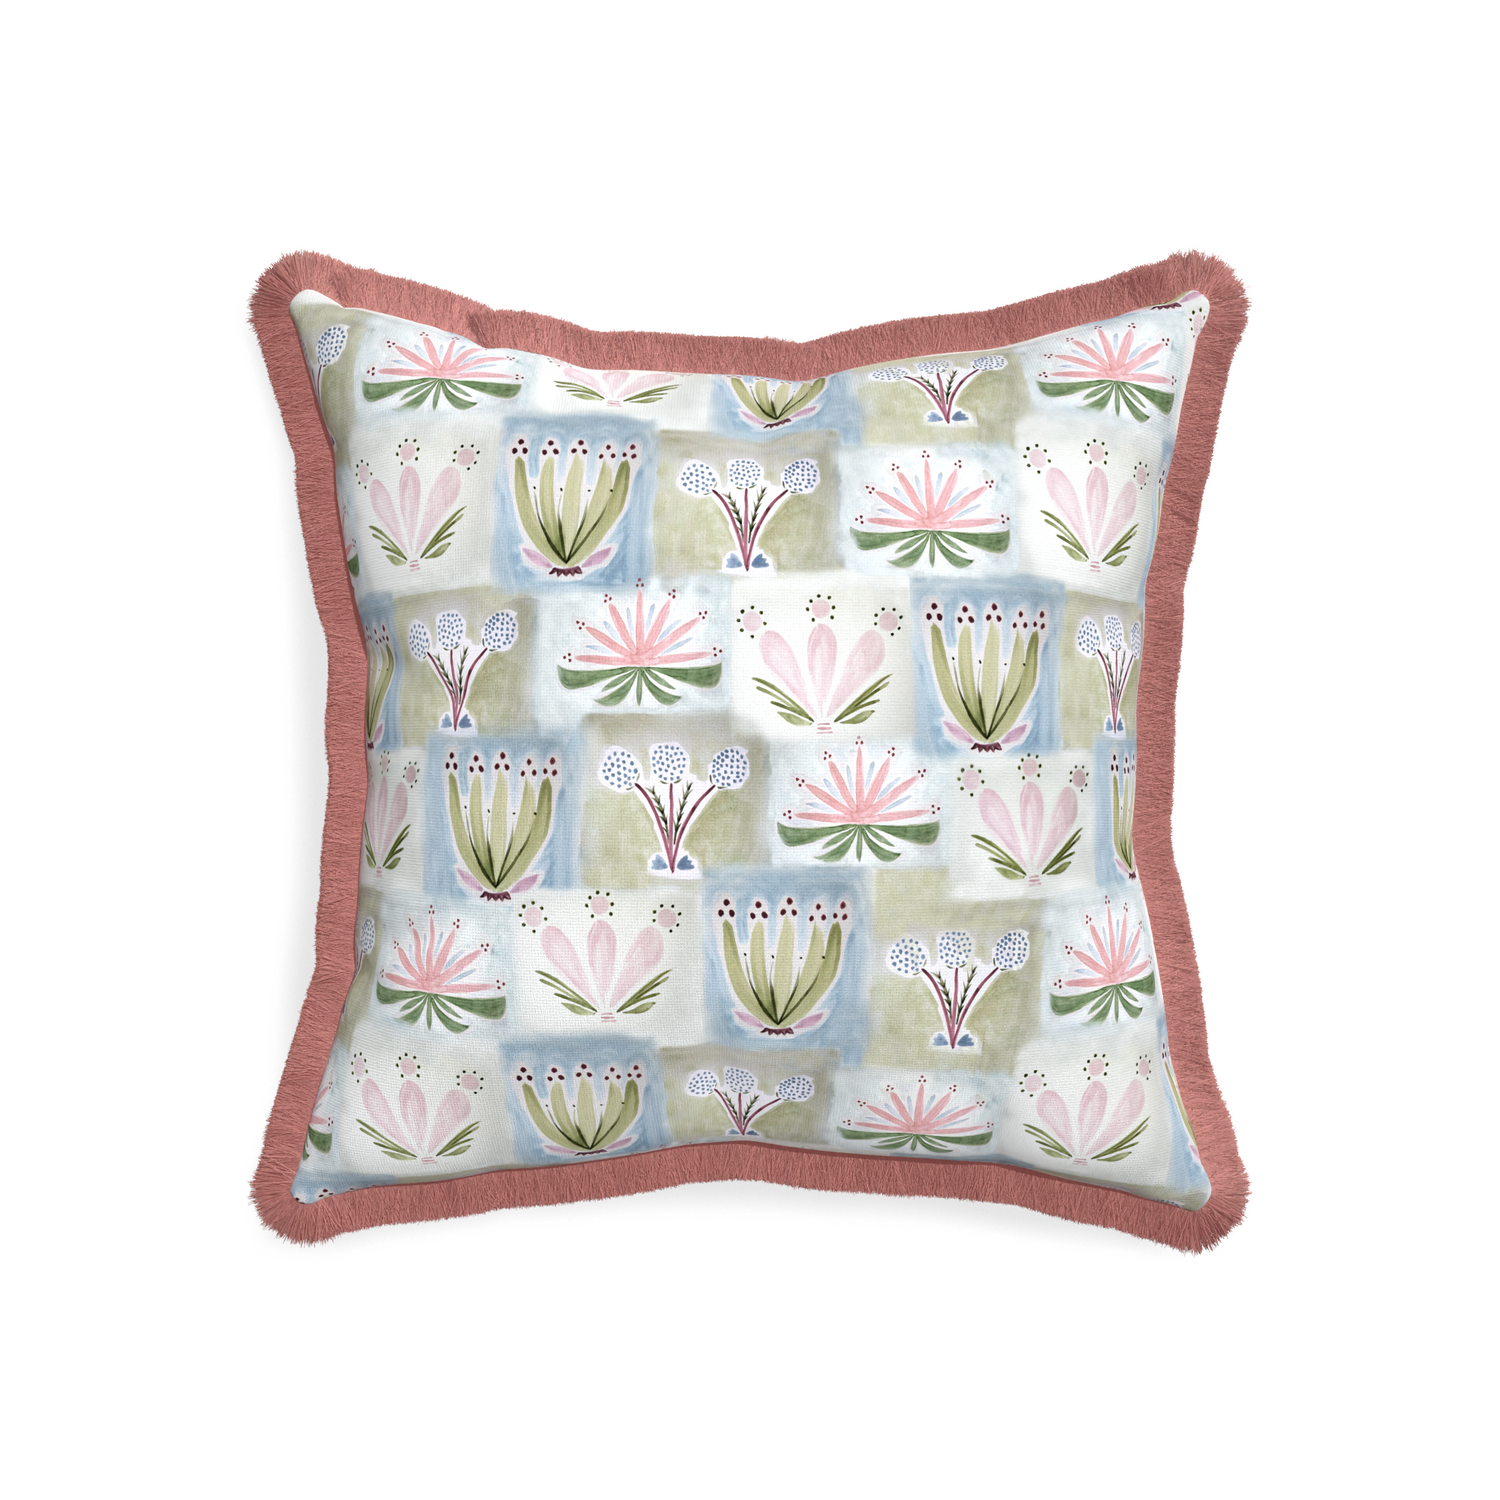 20-square harper custom hand-painted floralpillow with d fringe on white background